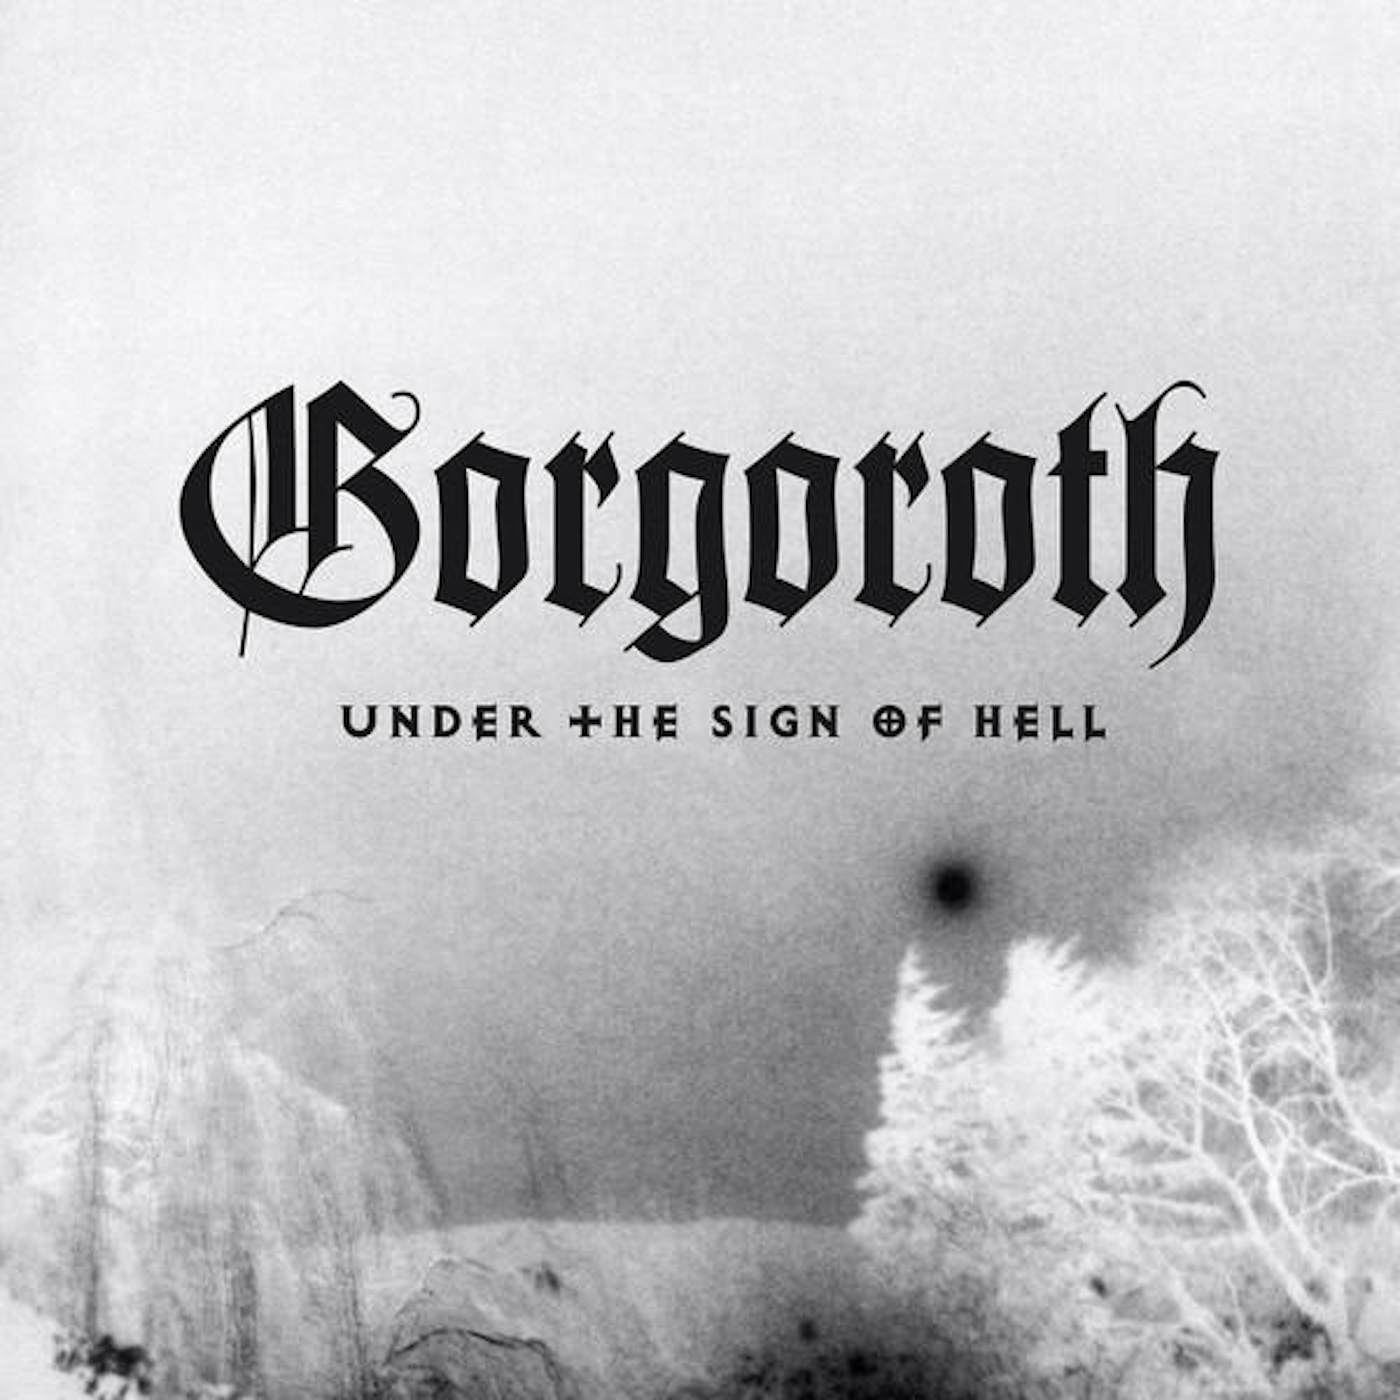 Gorgoroth Under the Sign of Hell Vinyl Record